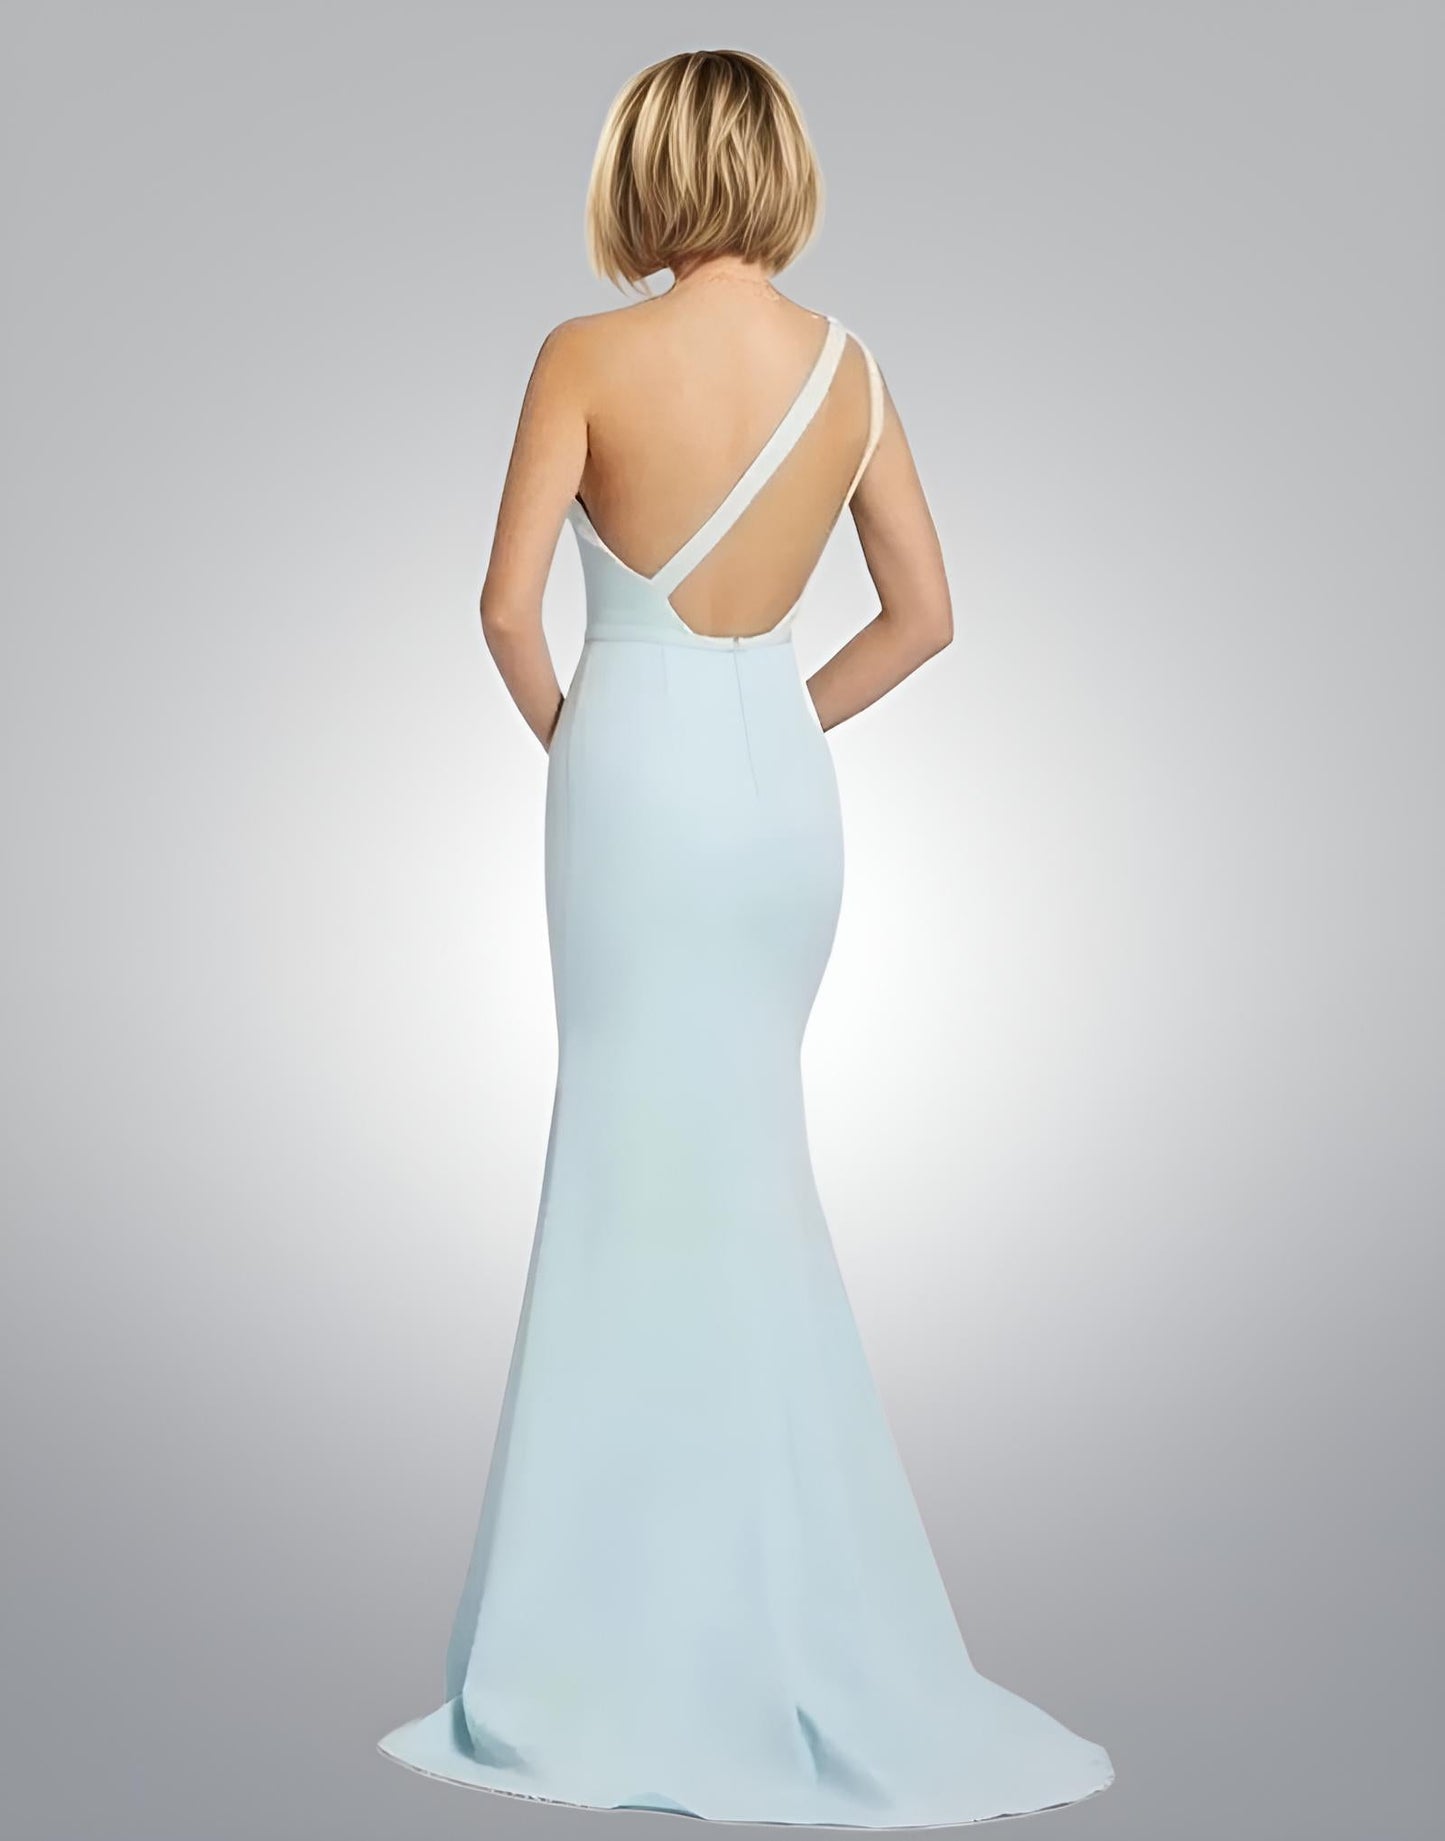 Sky Blue Backless Satin Mermaid Evening Dresses One-Shoulder Prom Gown Party Dress